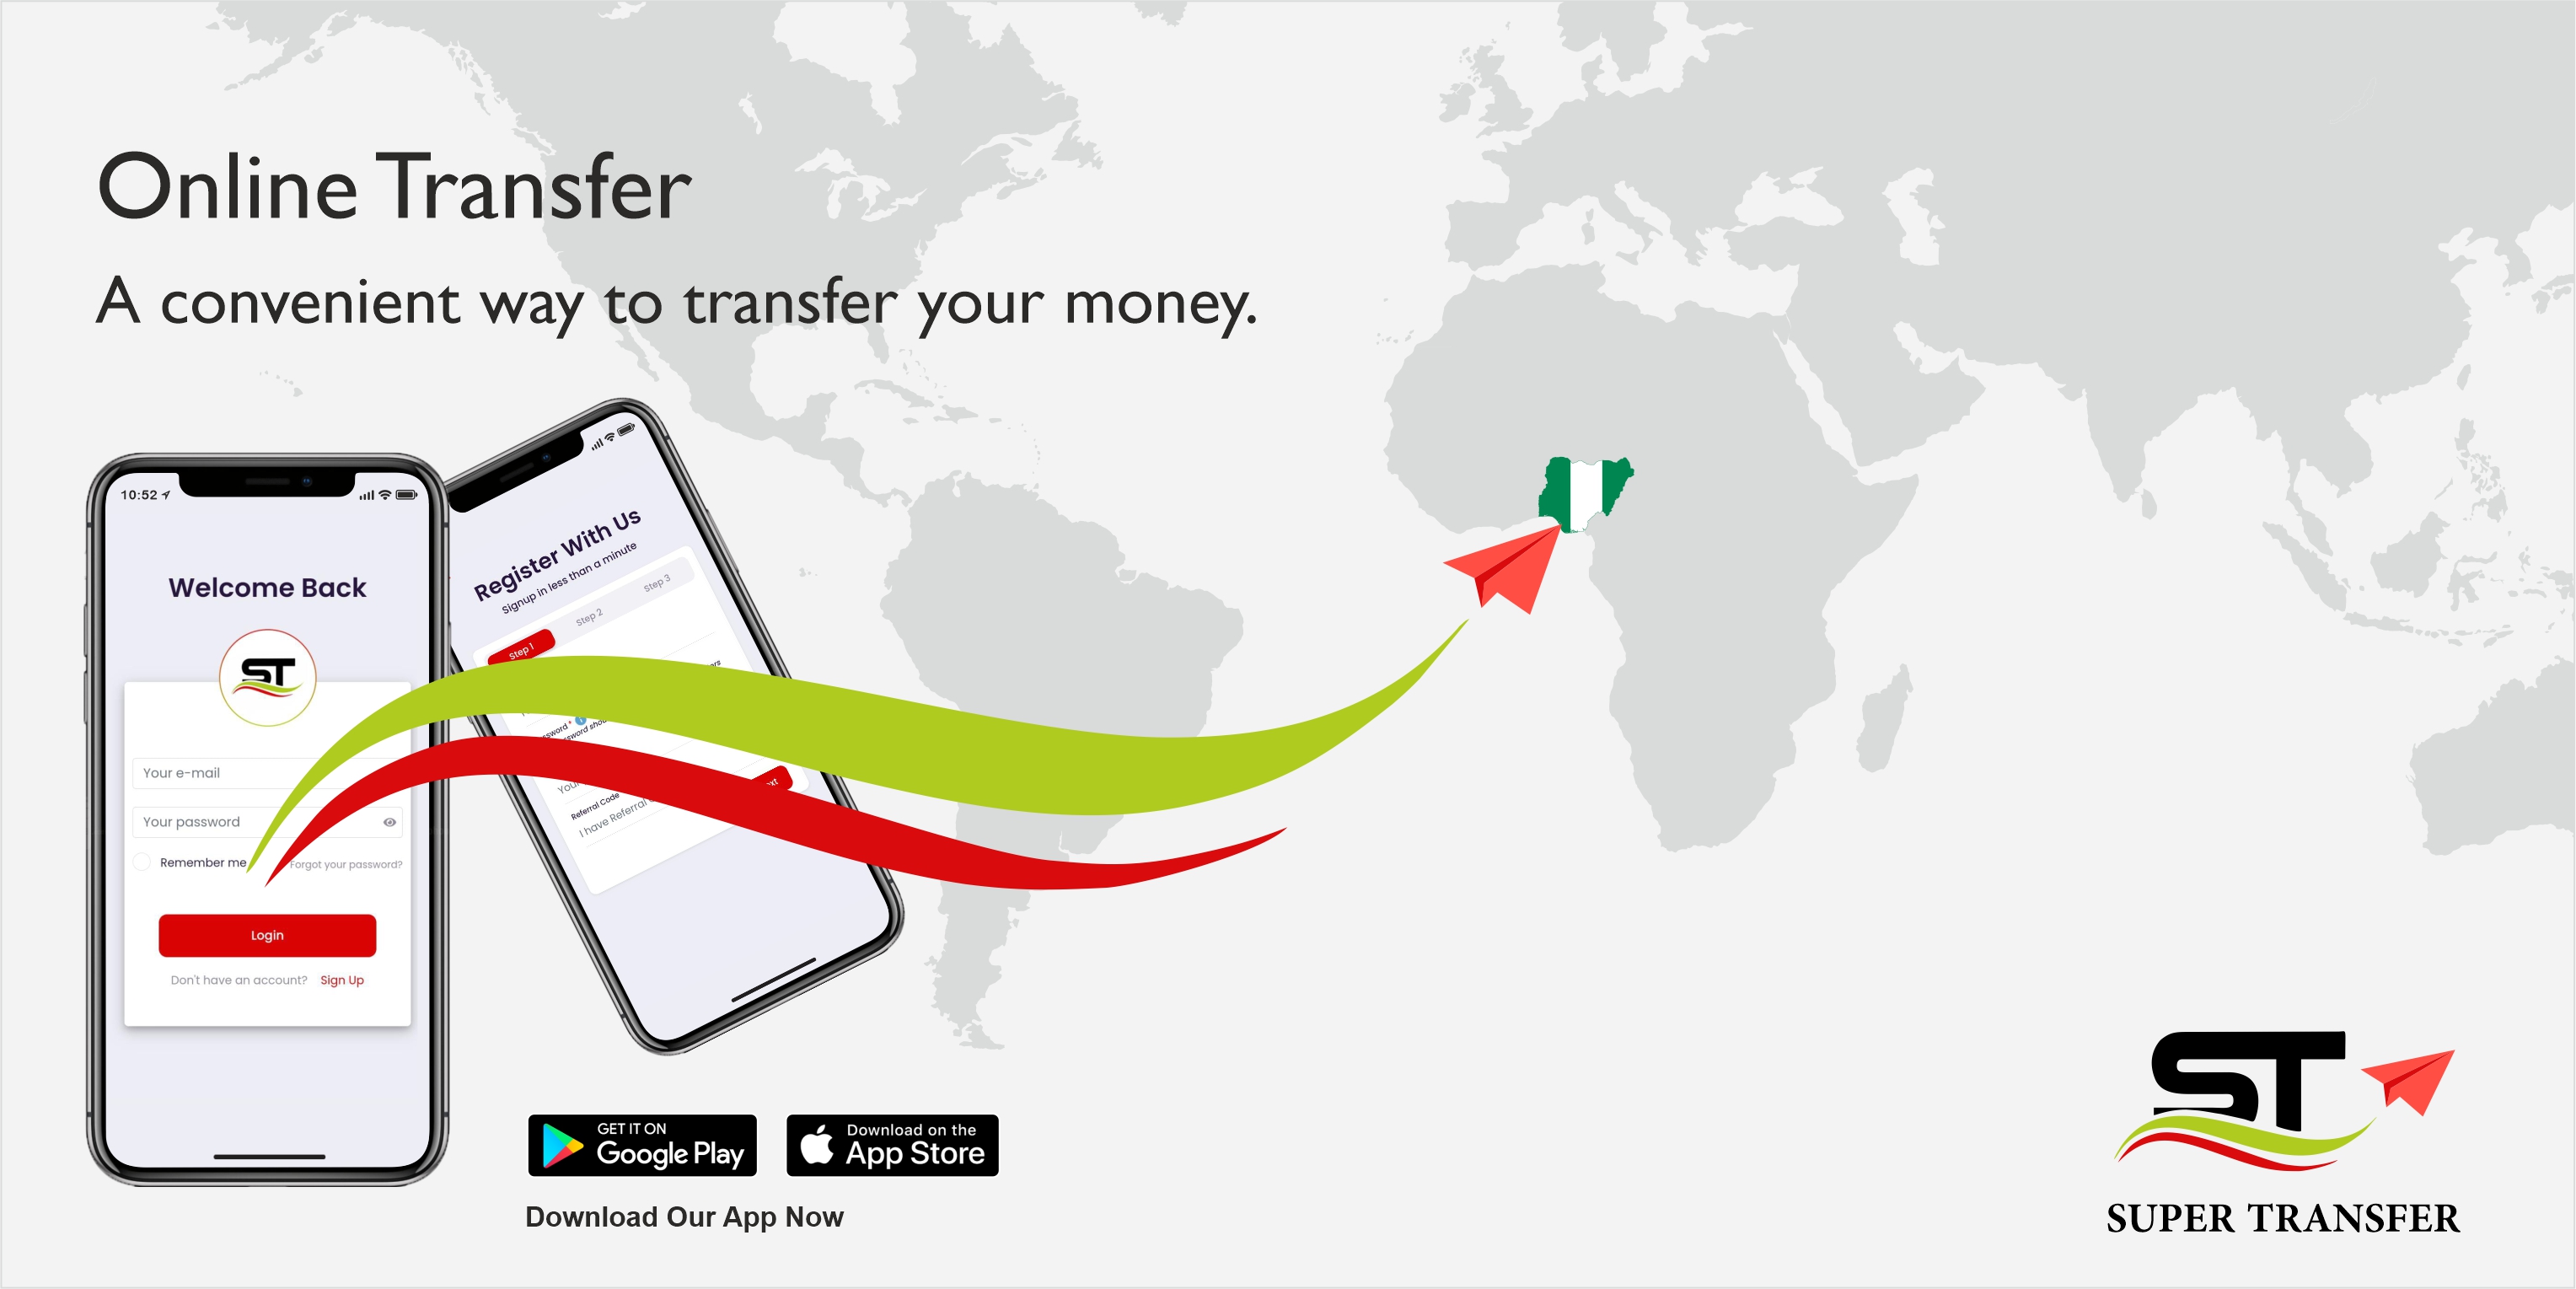 Online Money Transfer- A convenient way to transfer your money